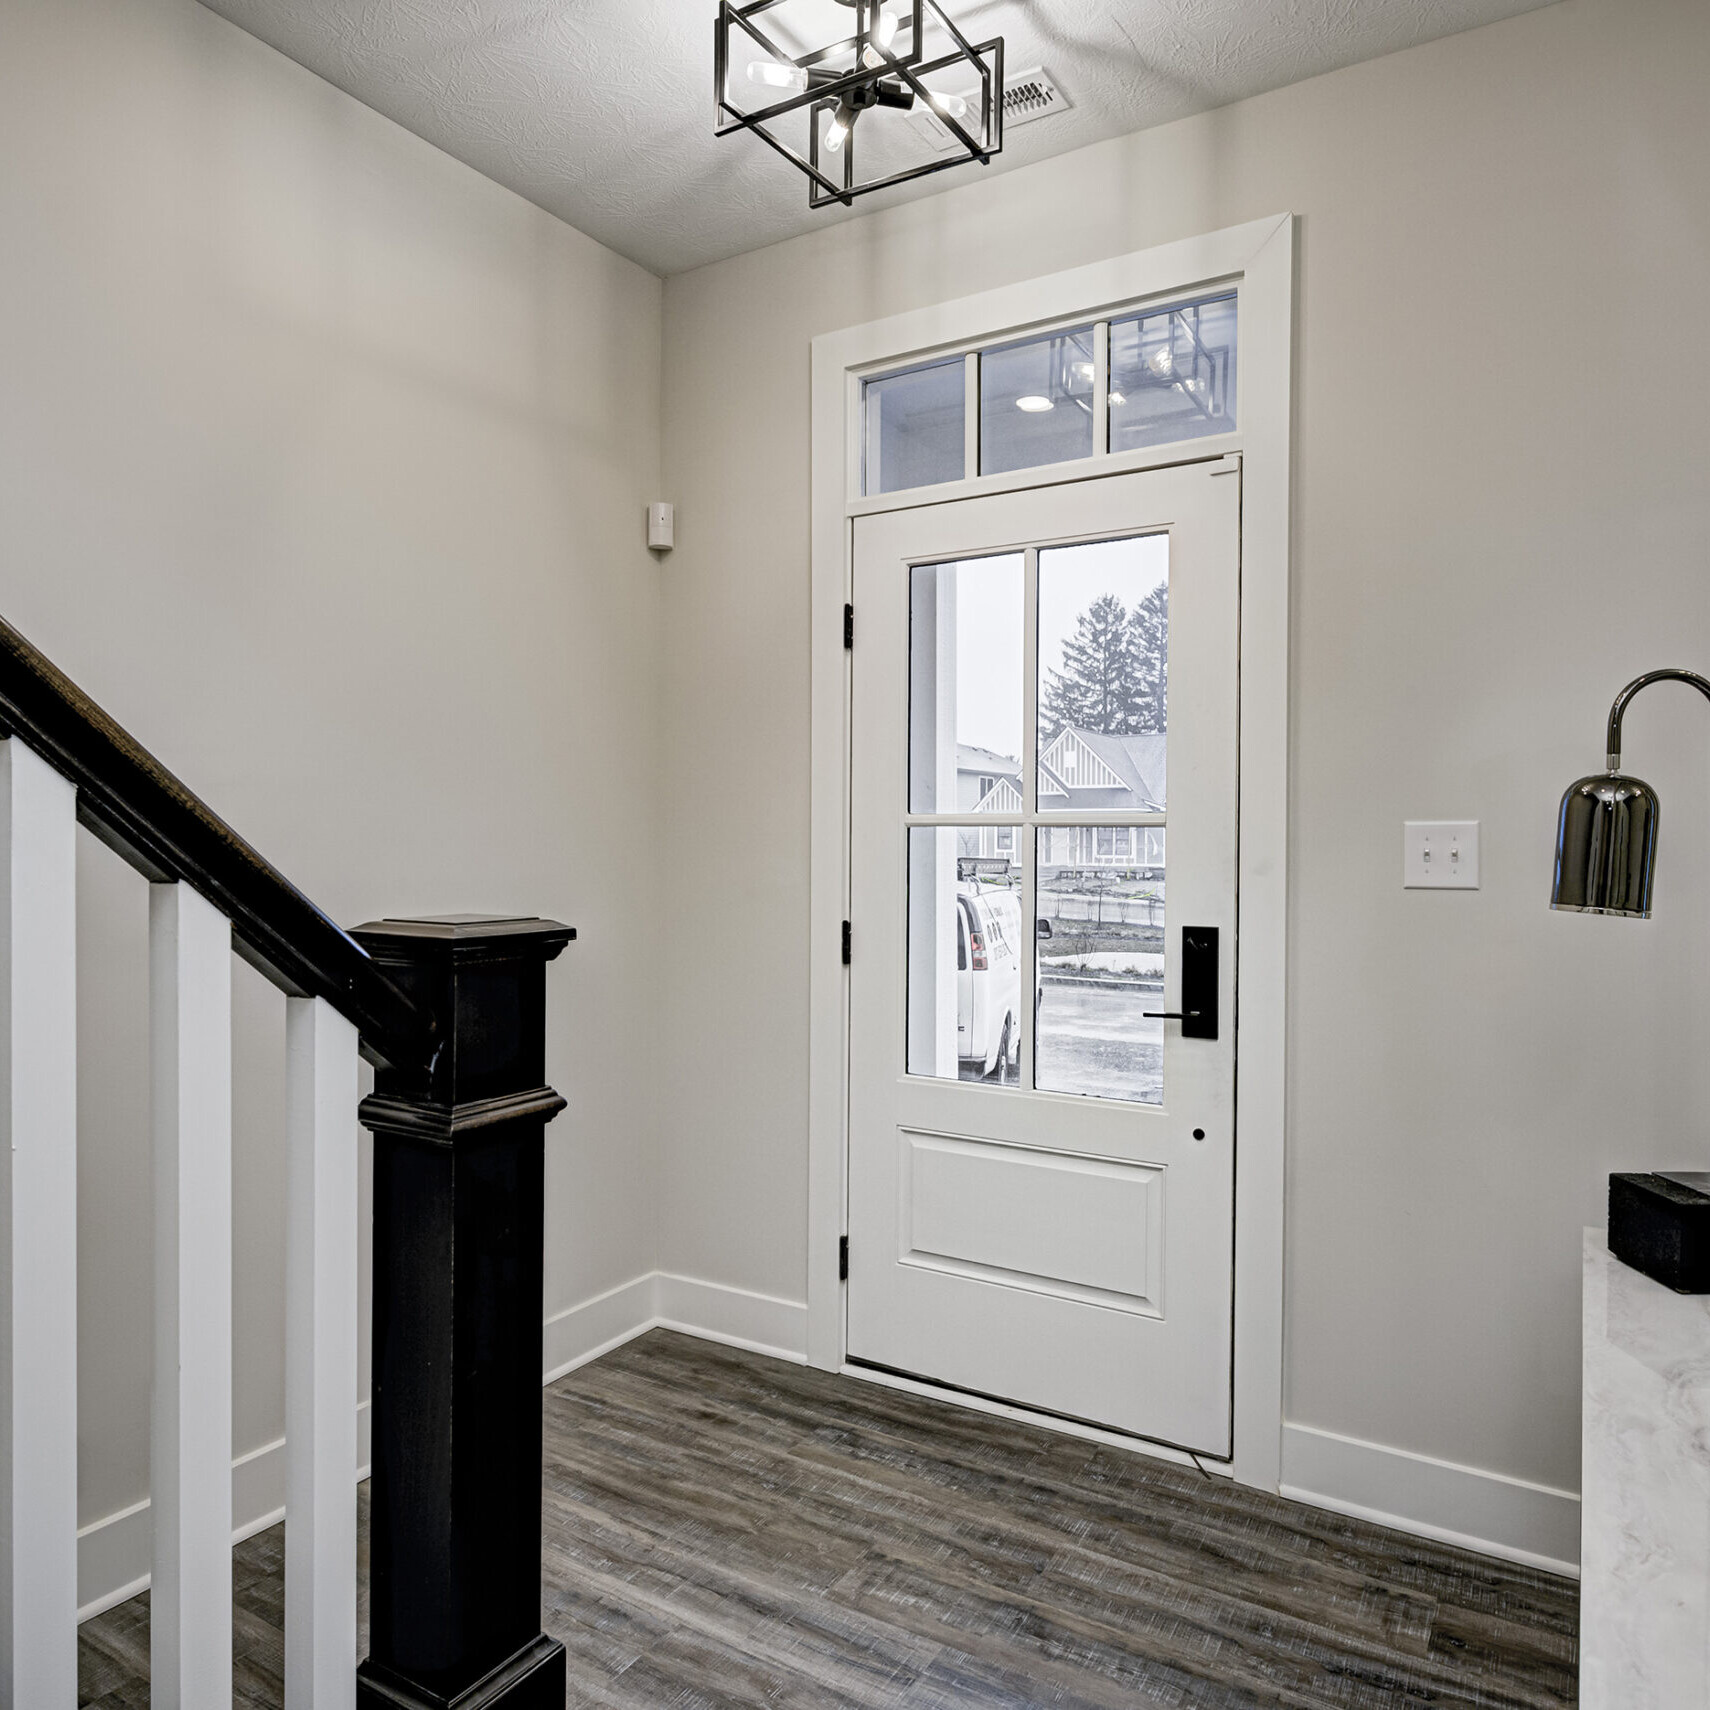 A hallway in a home with a white door and black railing, designed by a custom home builder.